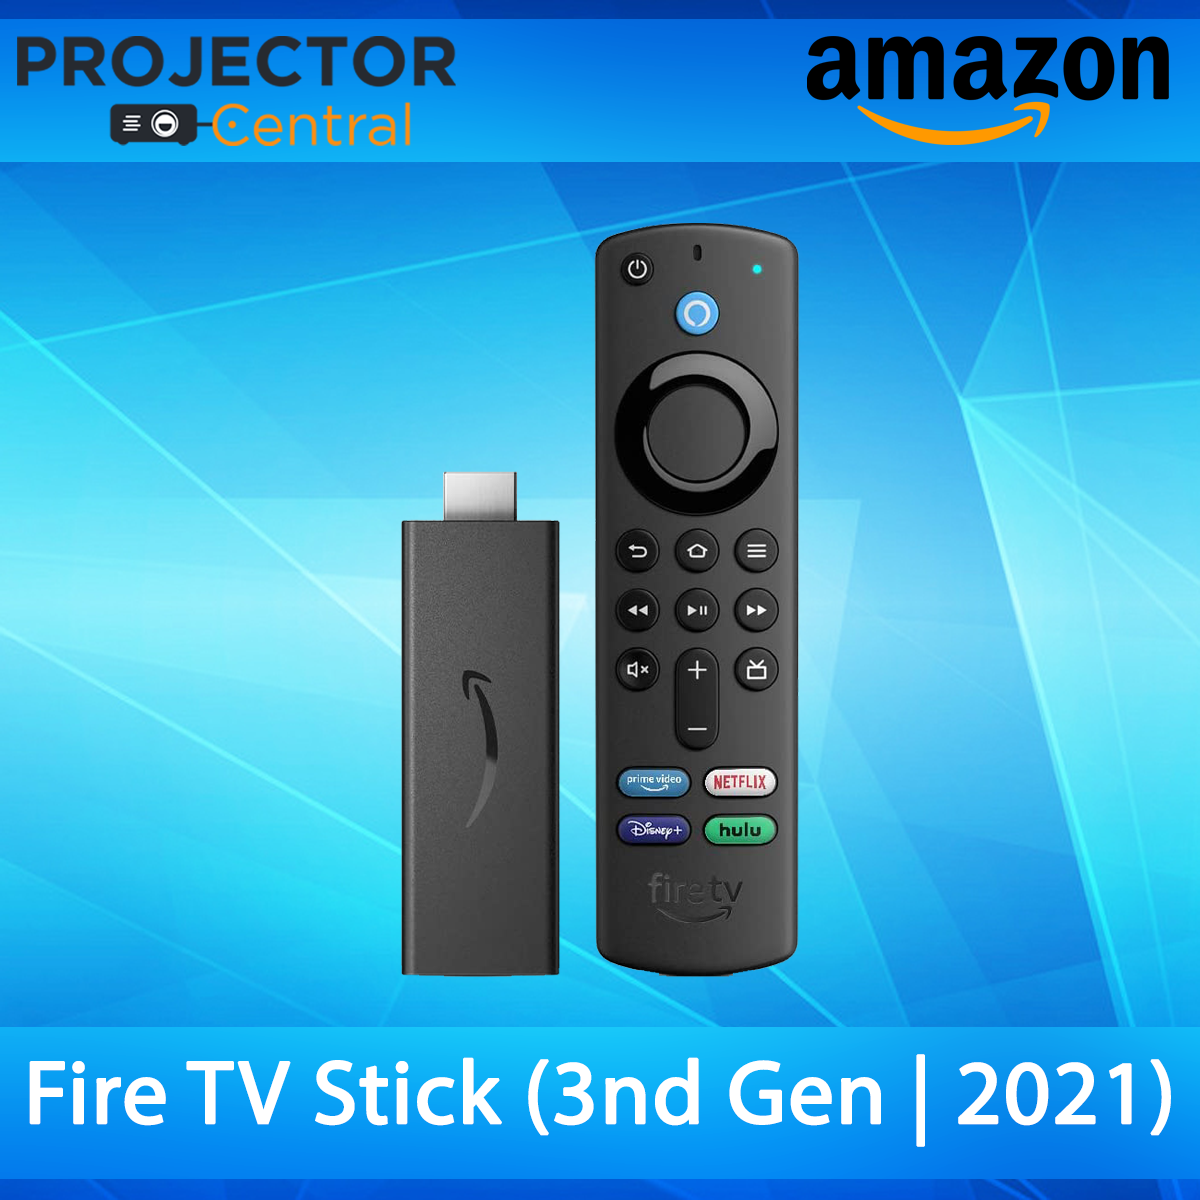 All new Amazon Fire TV Stick (3rd Gen) 2021 with Alexa Voice Remote (includes TV controls) | HD streaming device | 2021 release and Amazon Fire TV Stick with Alexa Voice Remote 2020 ( 3rd Gen., Dolby Atmos ) ไม่รองรับ Disney+Hotstar ของ AIS!!!